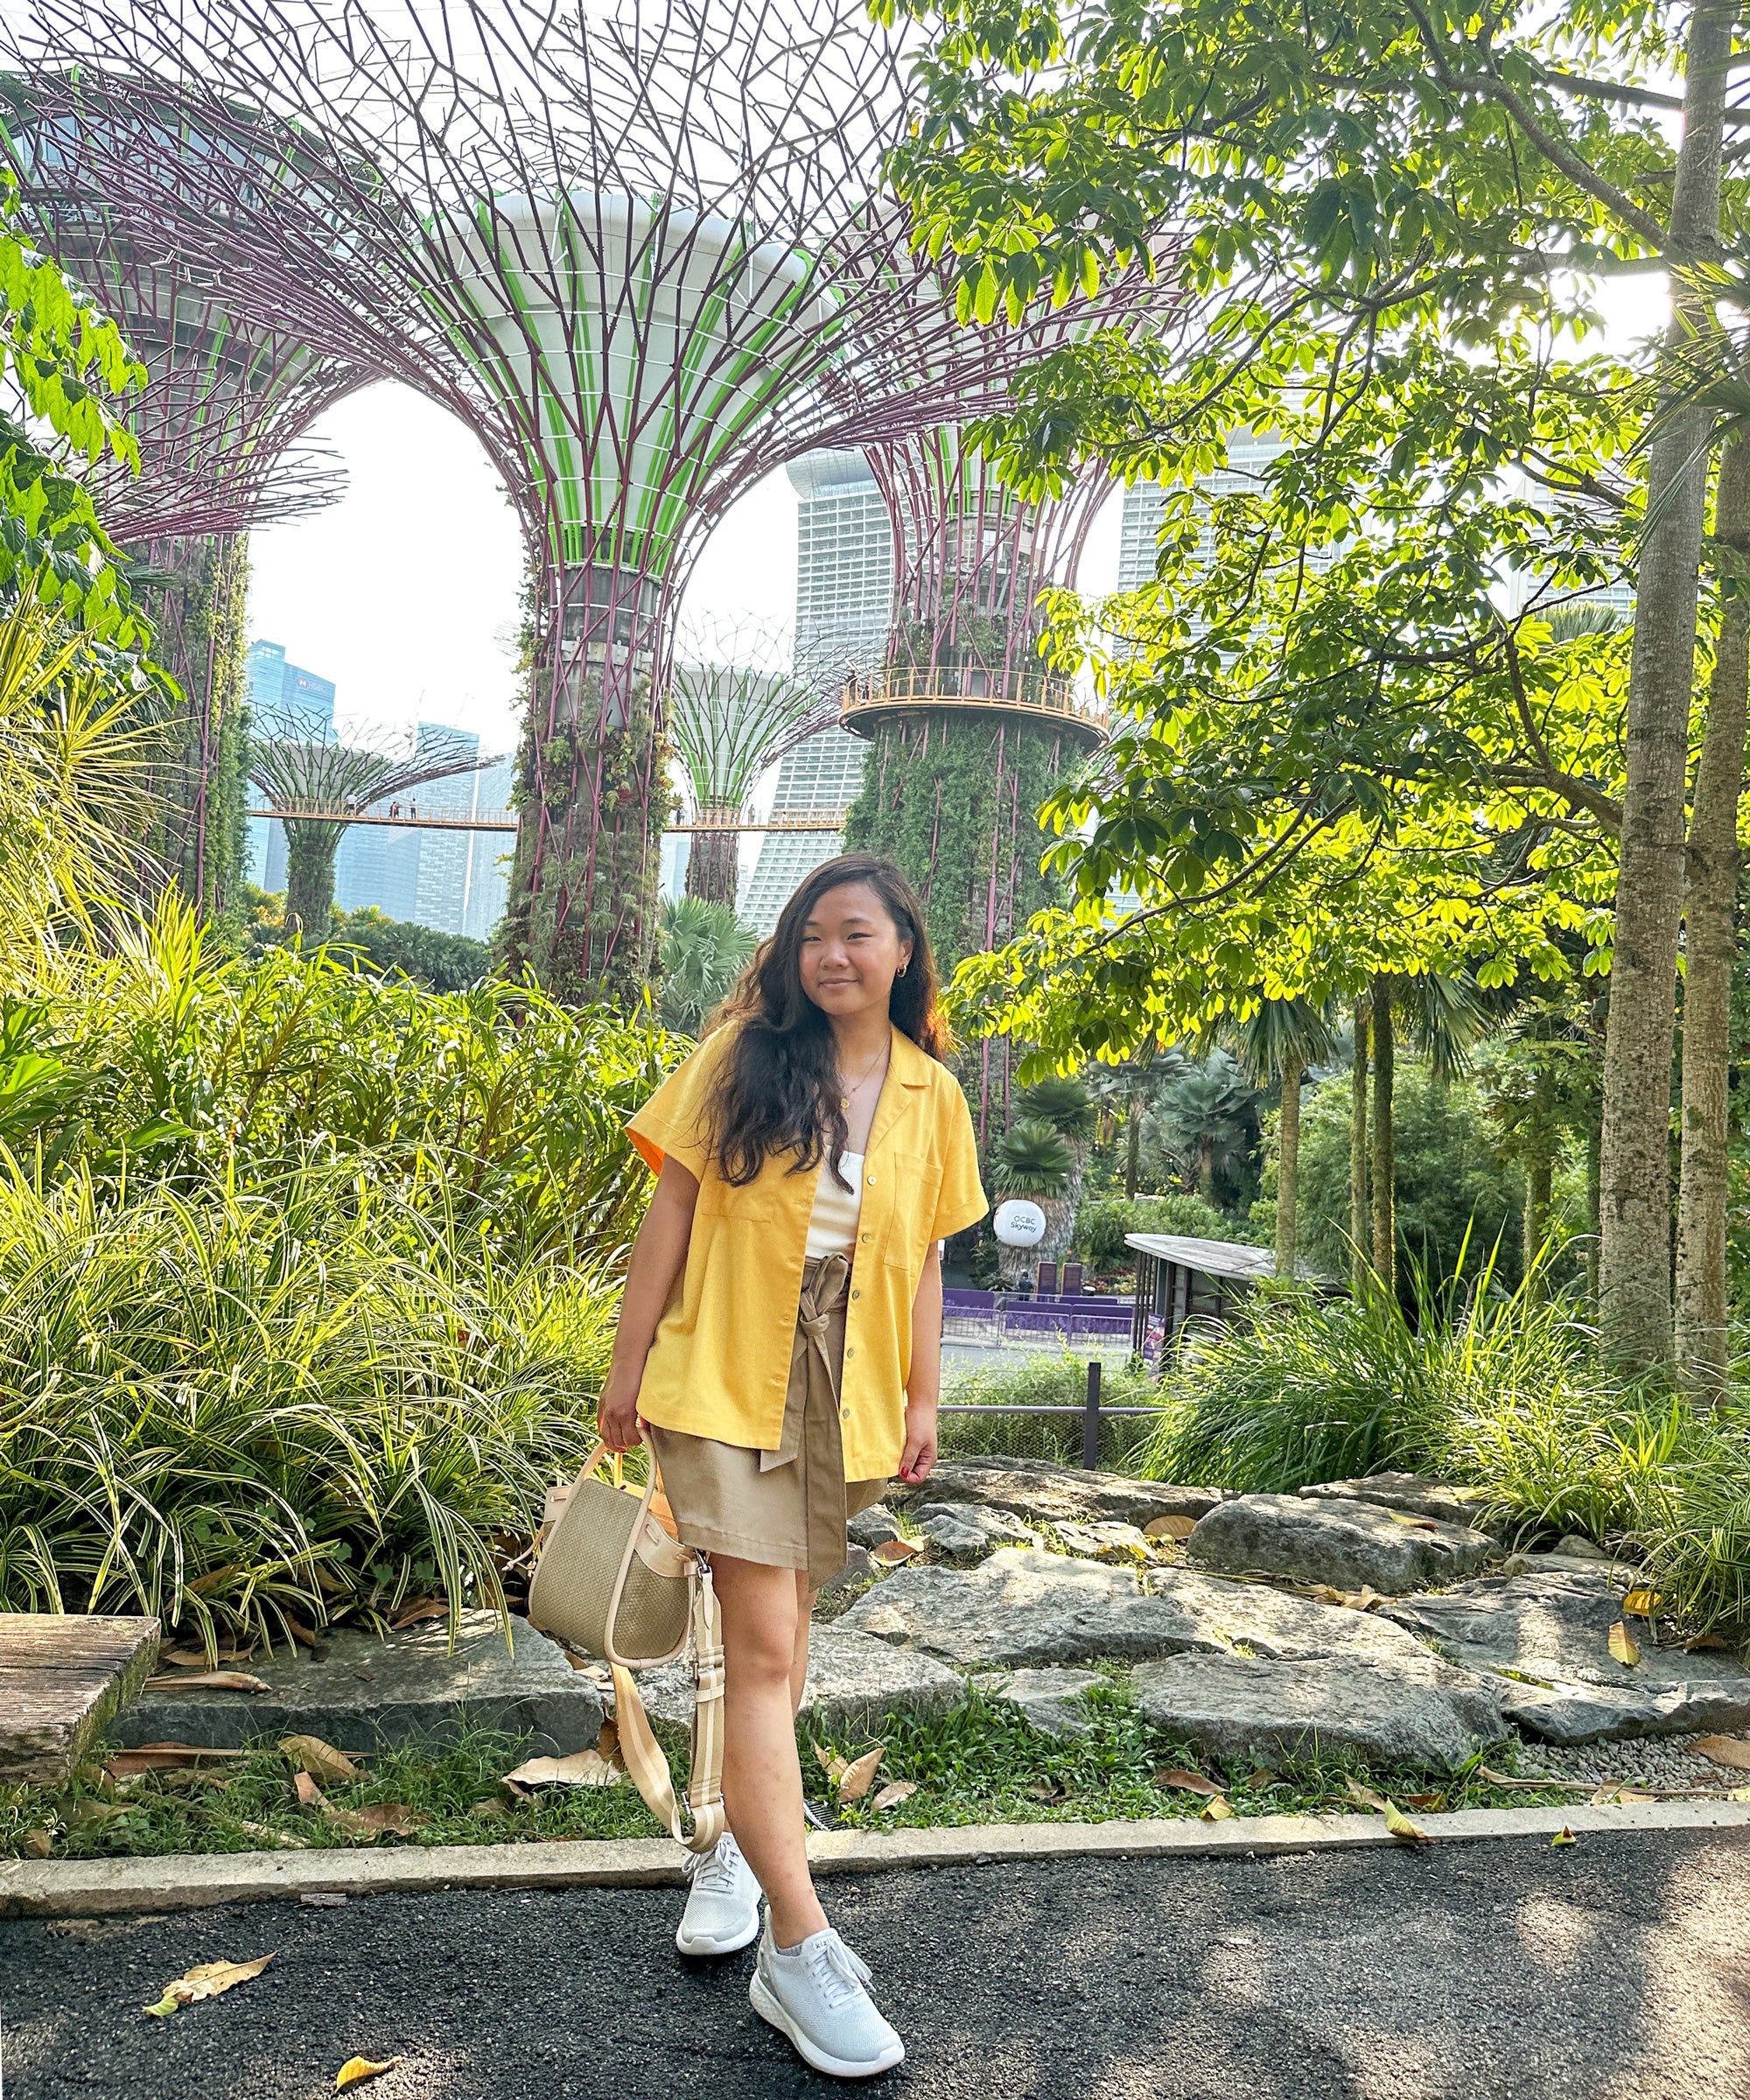 CHARLES & KEITH shares Changi Airport's passion for perfection